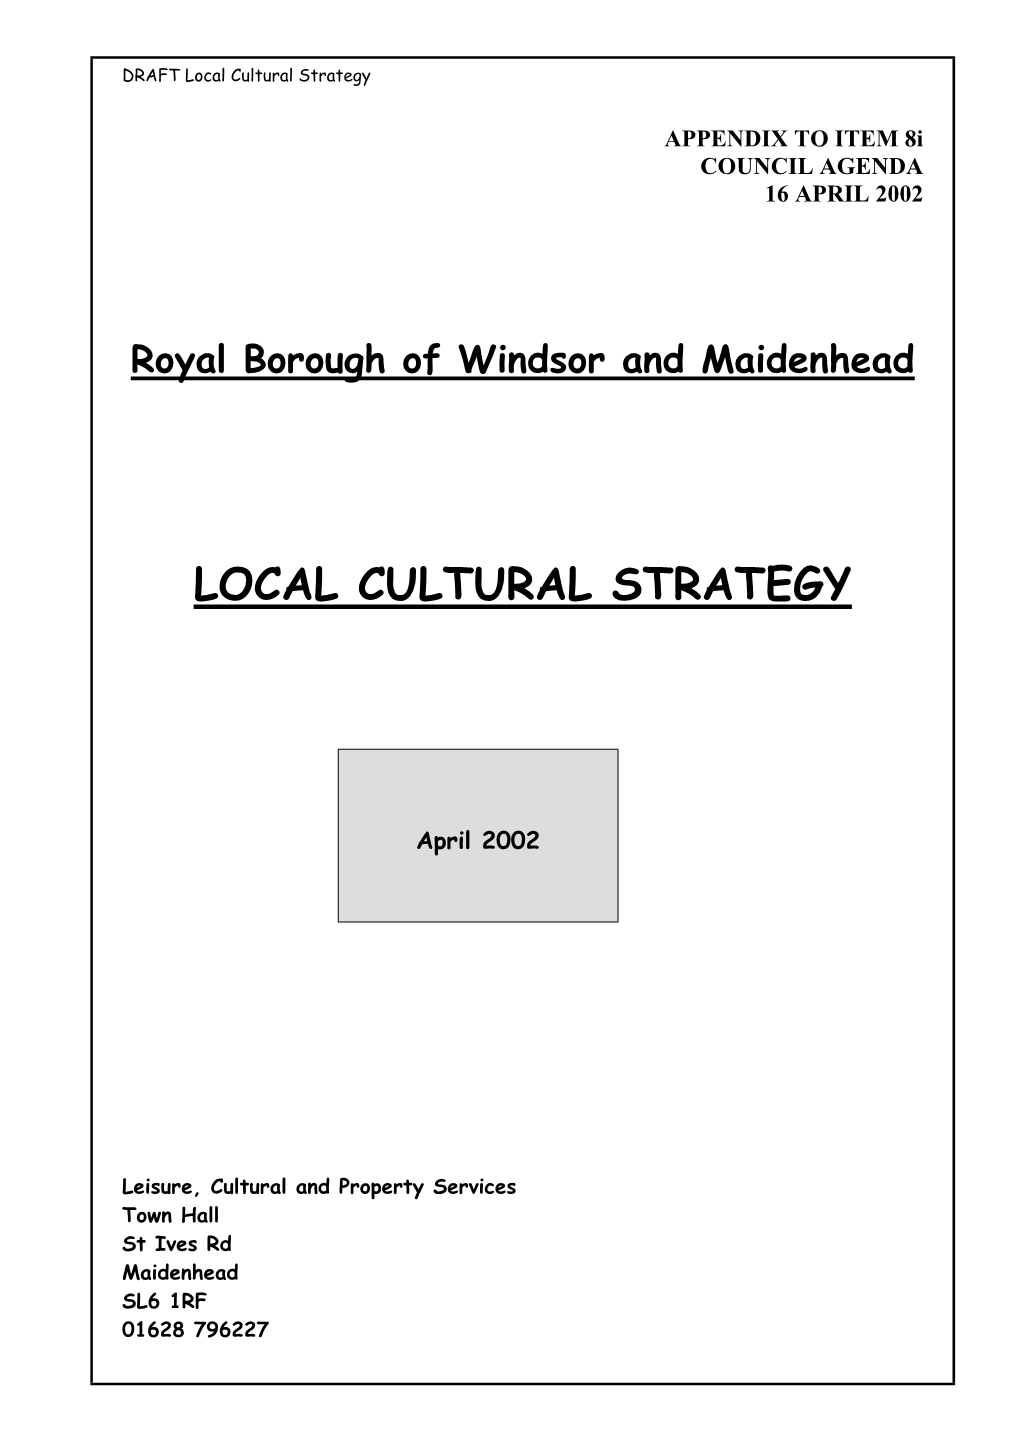 Local Cultural Strategy